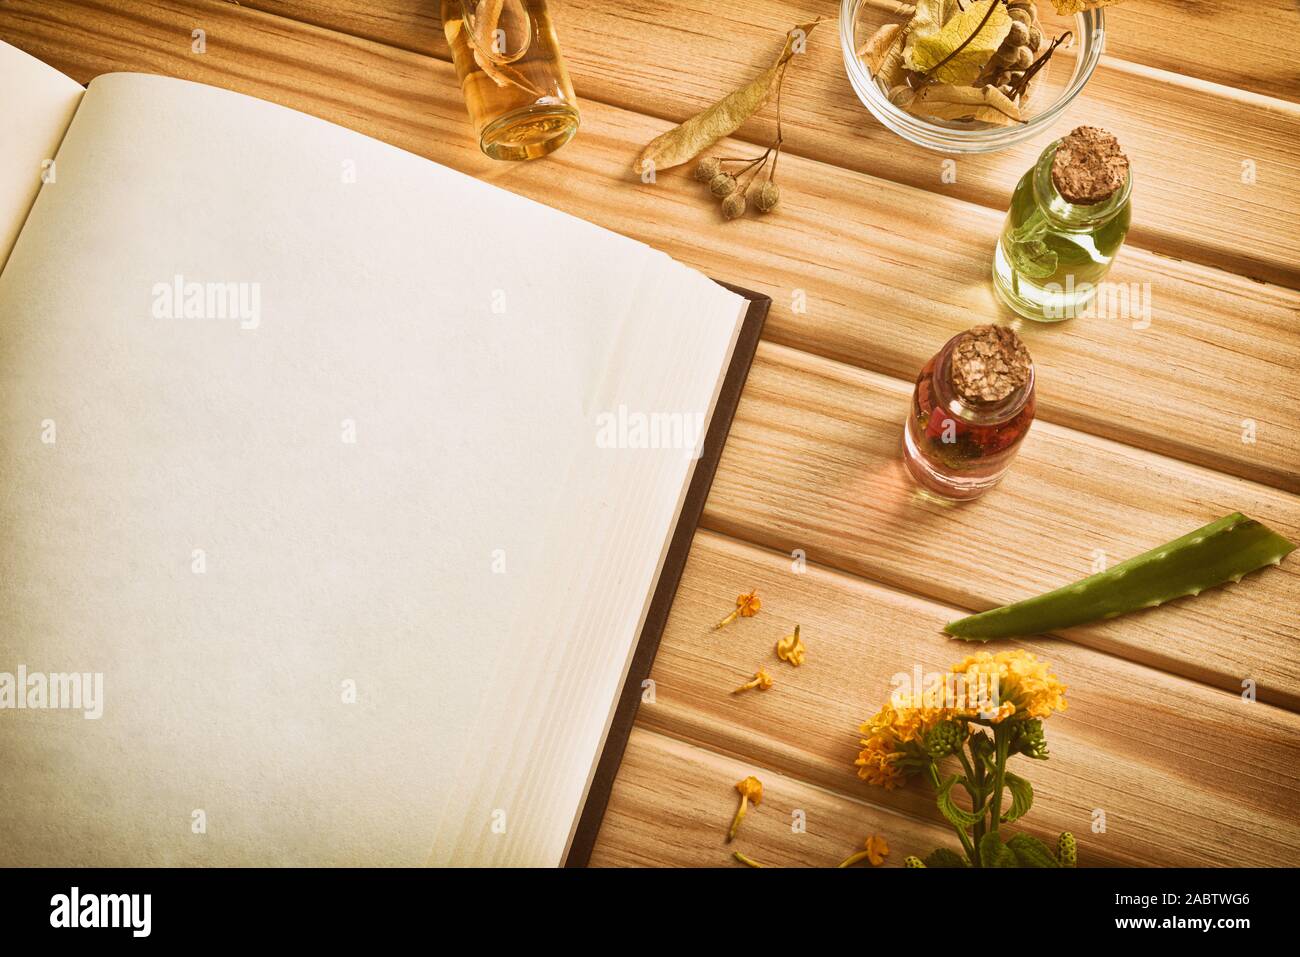 Blank book of recipes for the preparation of natural plant medicine on wooden table with medicinal and aromatic plants close up. Top view. Horizontal Stock Photo